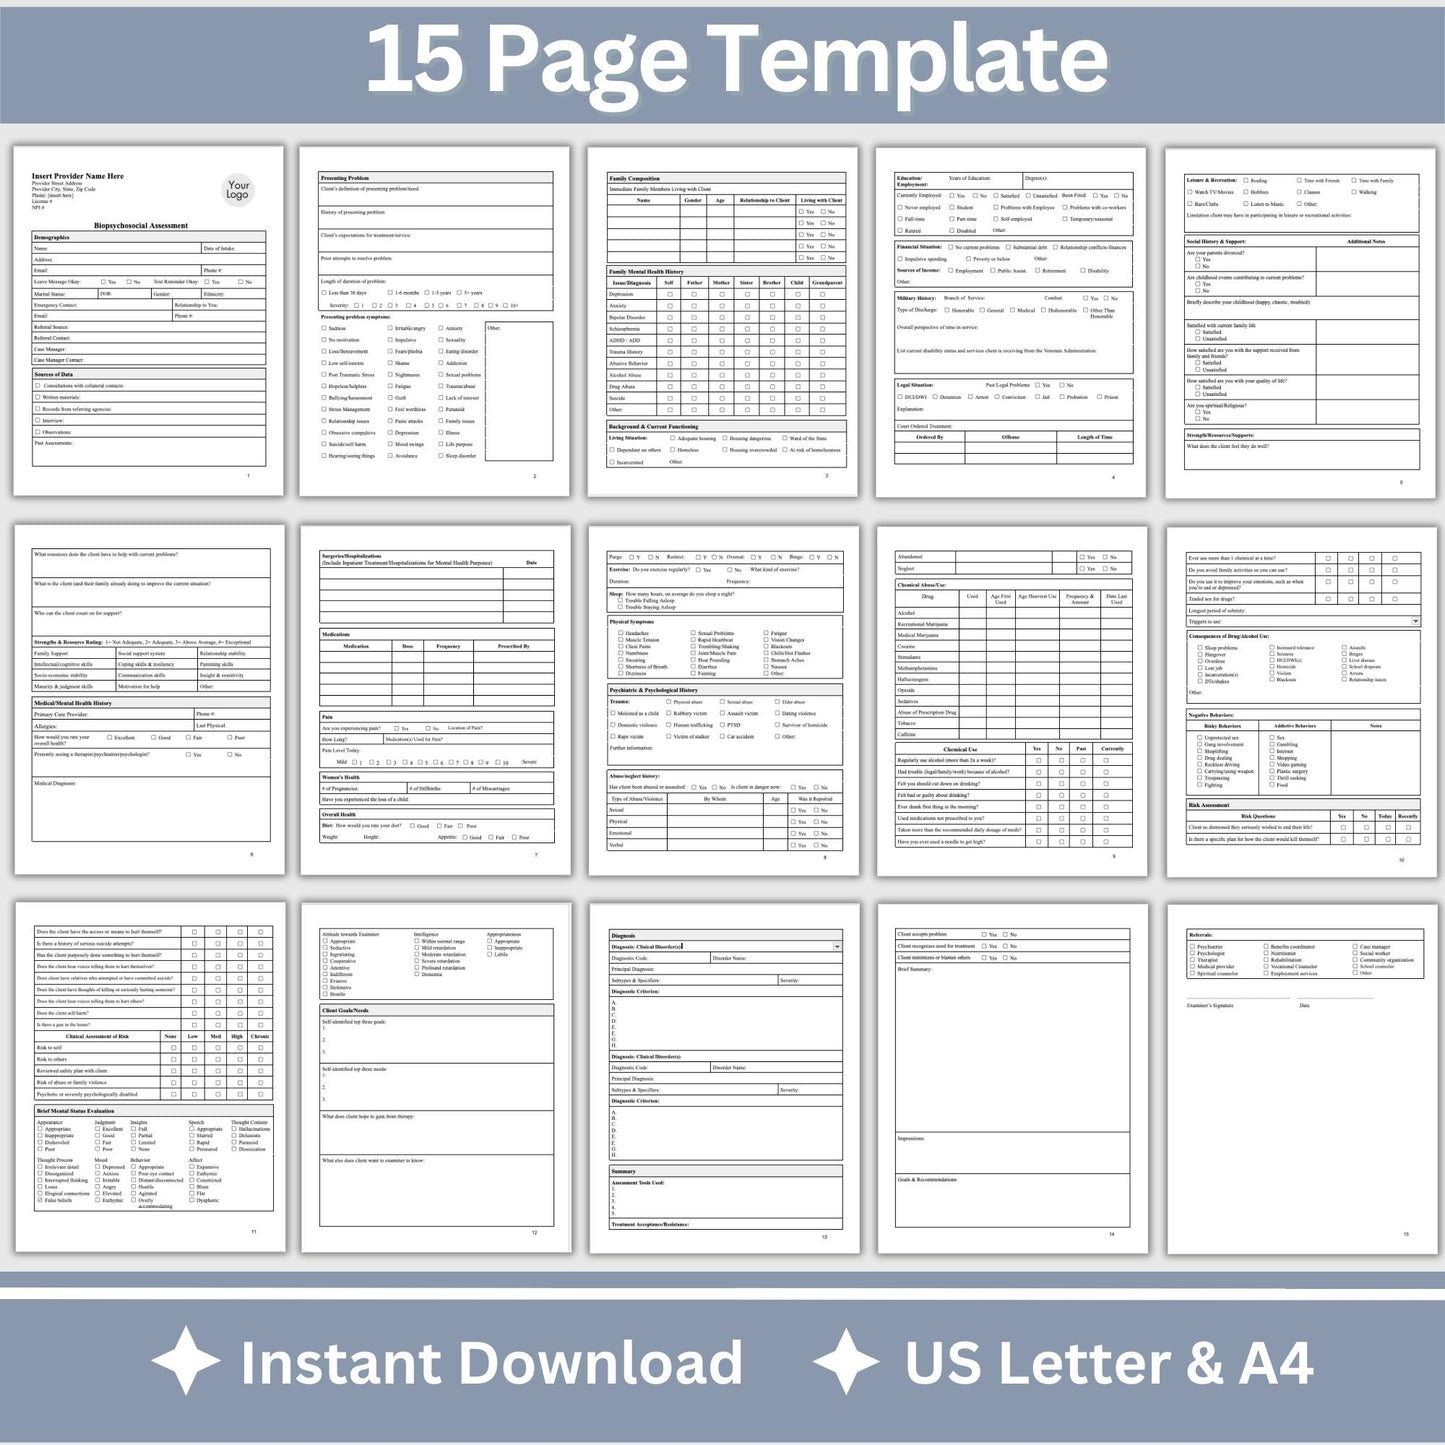 15-page comprehensive biopsychosocial editable Google Doc template! Perfect for therapists, school psychologists, and professionals in psychology fields. Streamlining your therapist office, therapy notes, psychology, therapy tool, therapy resource